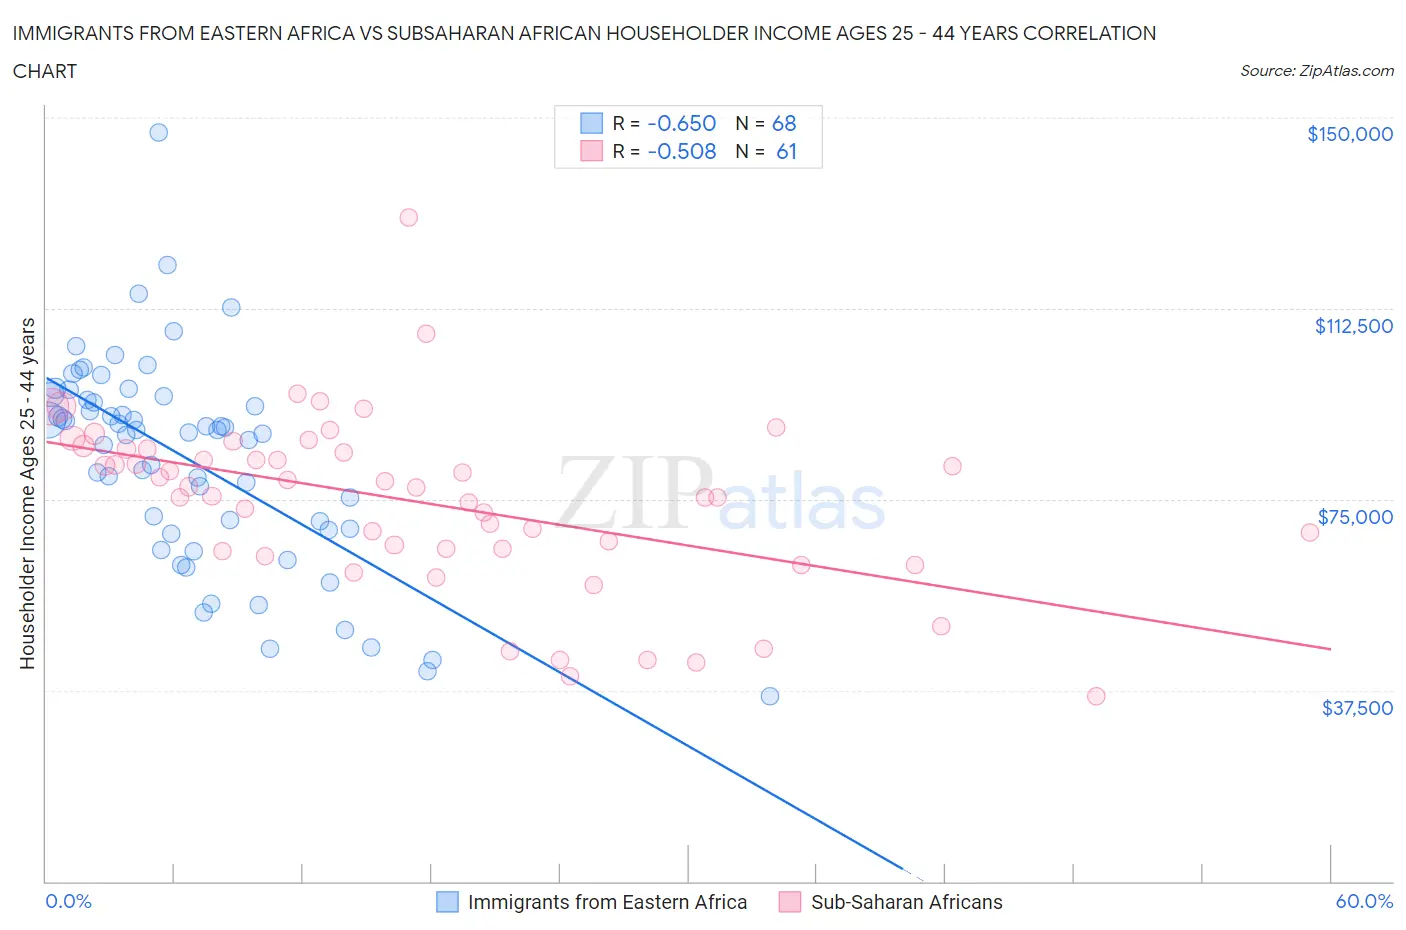 Immigrants from Eastern Africa vs Subsaharan African Householder Income Ages 25 - 44 years